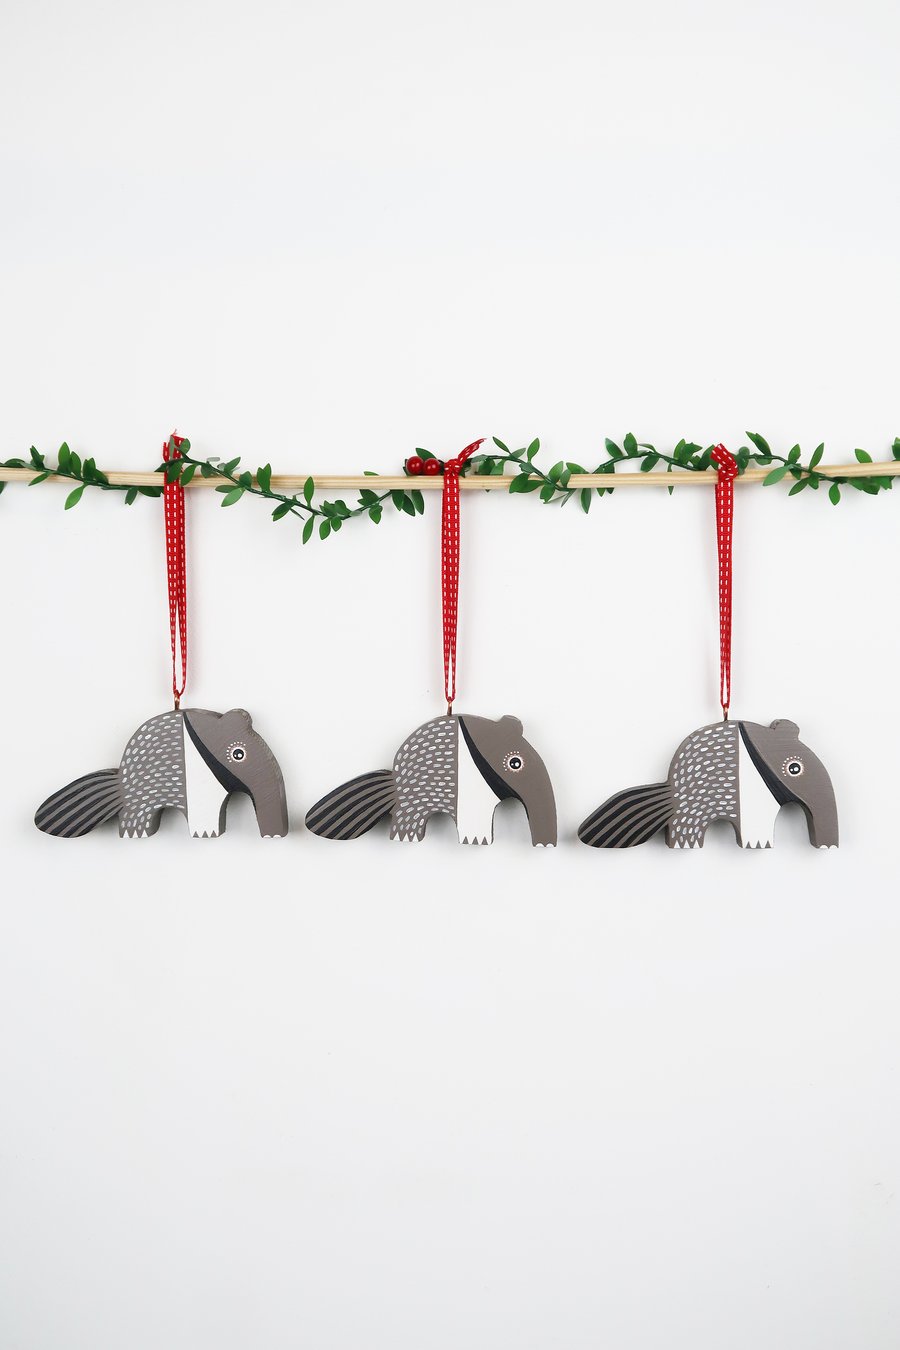 anteater christmas tree hanging decoration, set of 3 cute stocking fillers